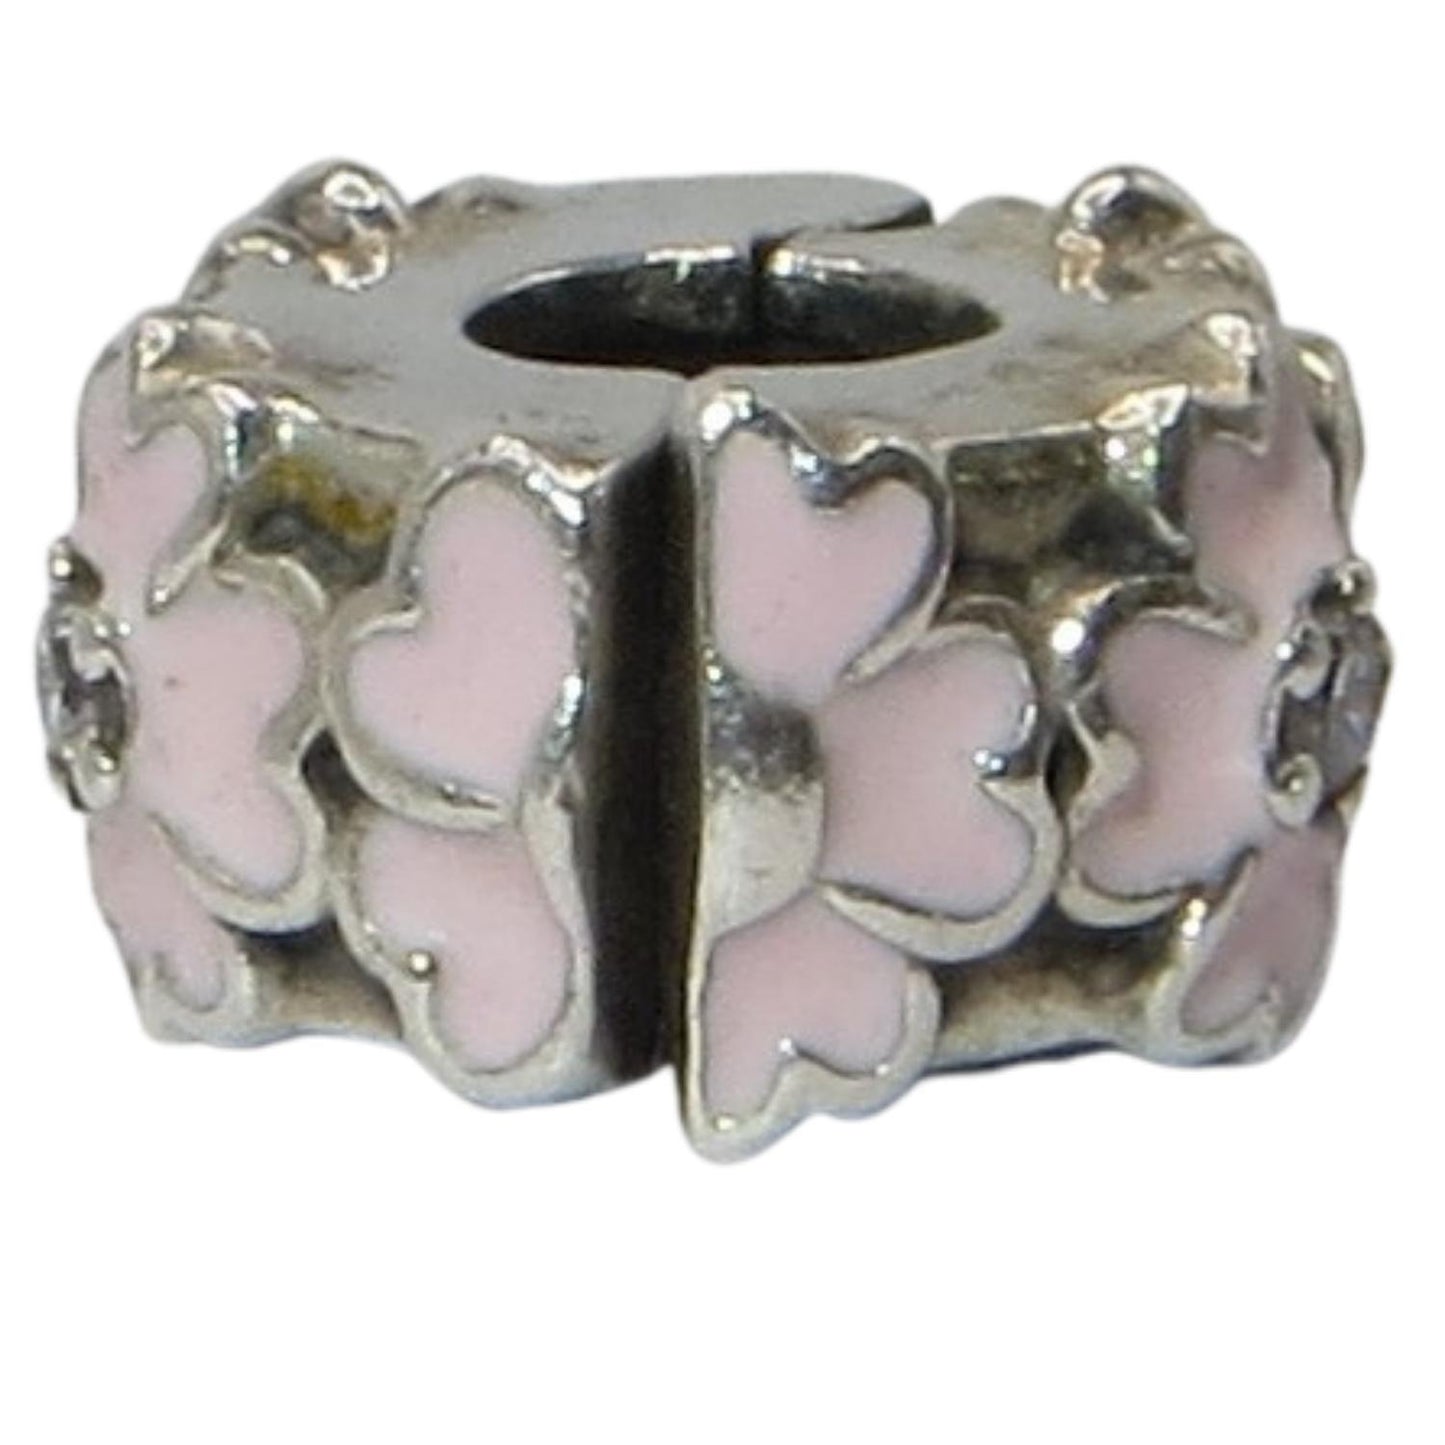 Pandora-791823EN68-Primrose Clip-Woman's Charm-Sterling Silver Pink Primrose Flower Clip with Pink Enamel and Silicone Core 